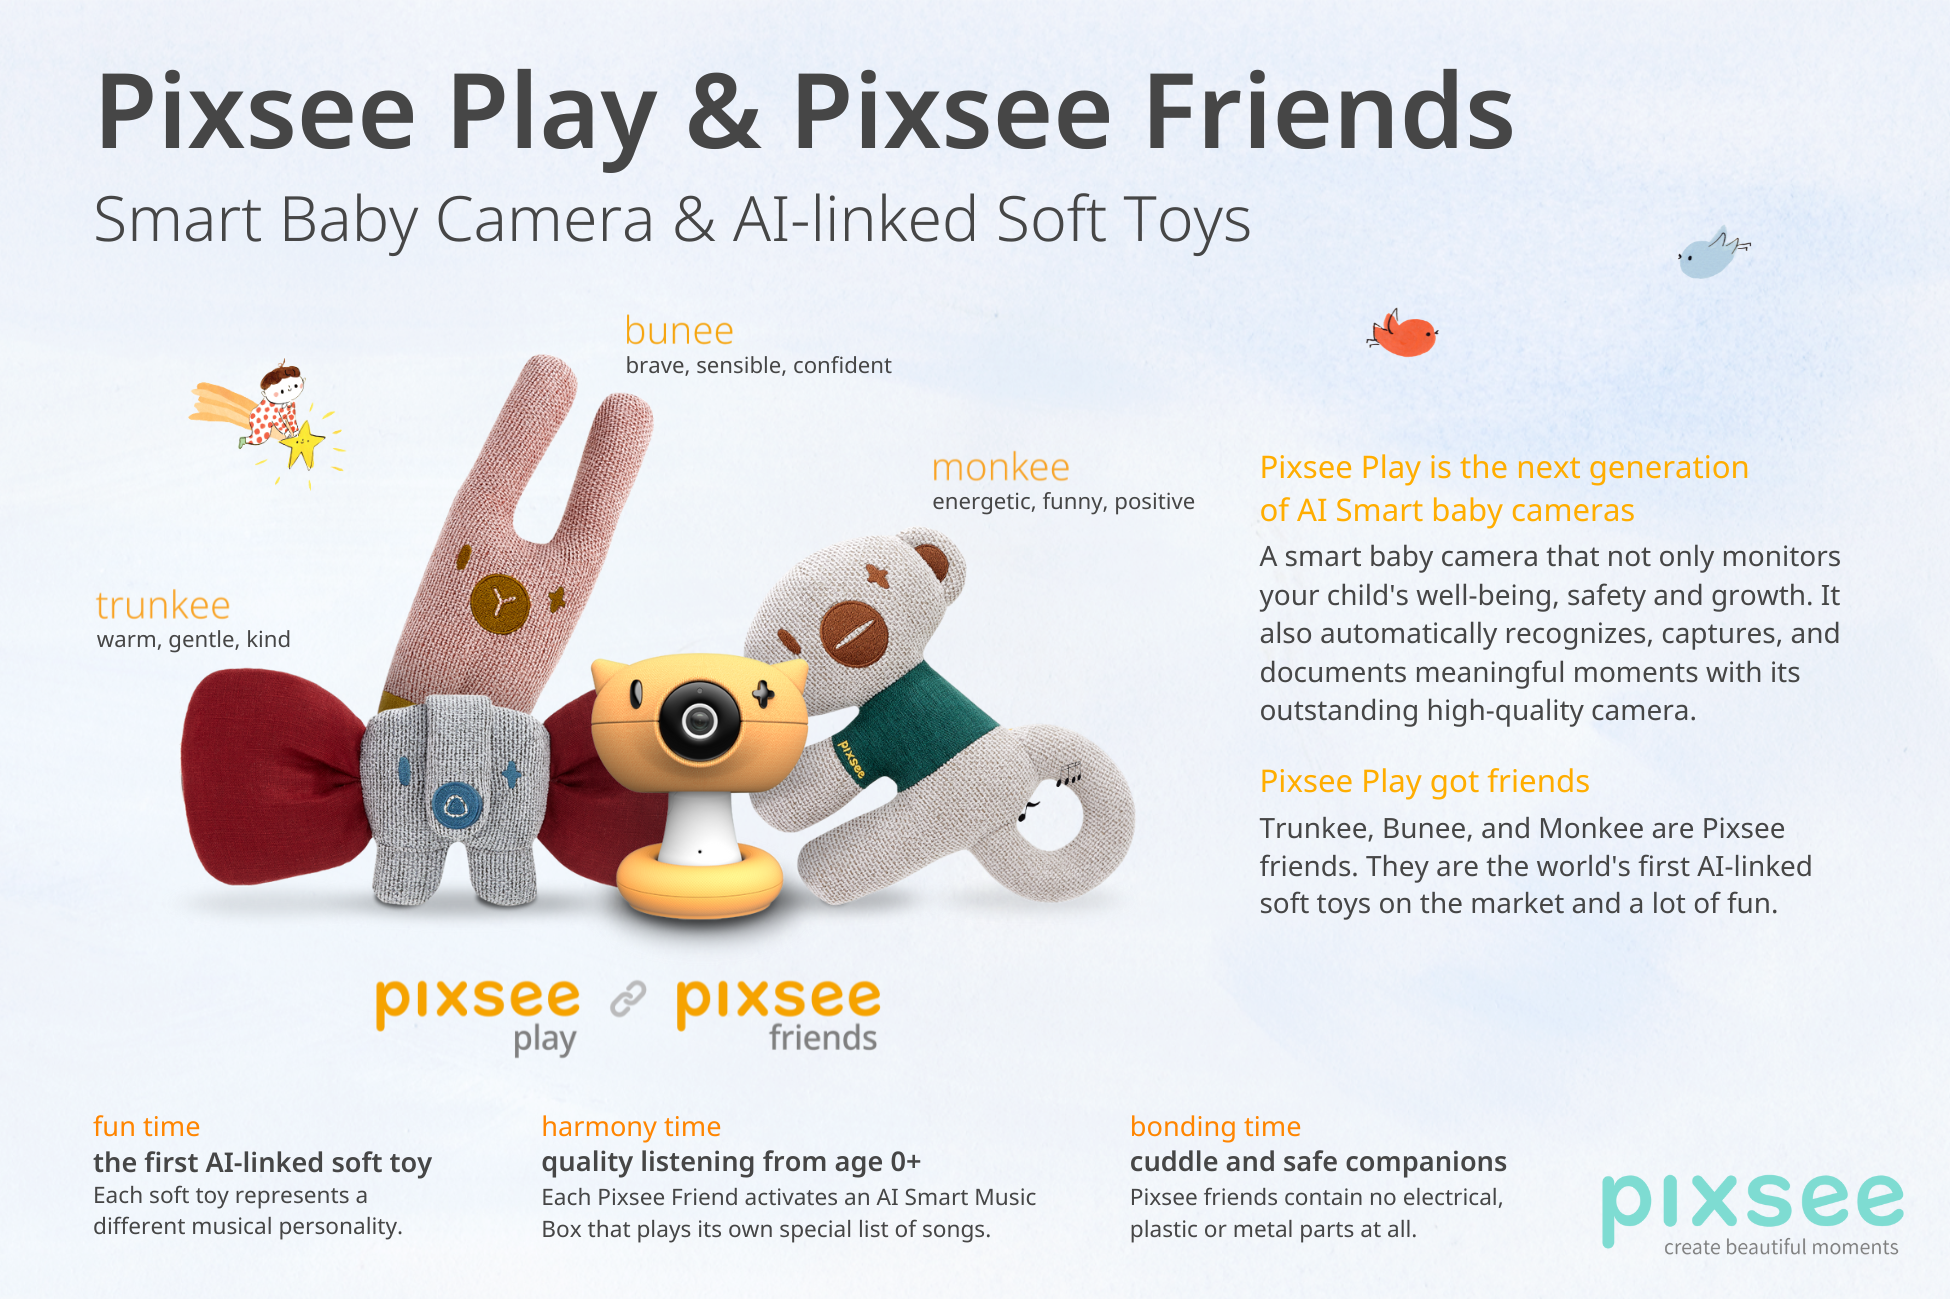 Pixsee Play & Pixsee Friends to Support for Child Development